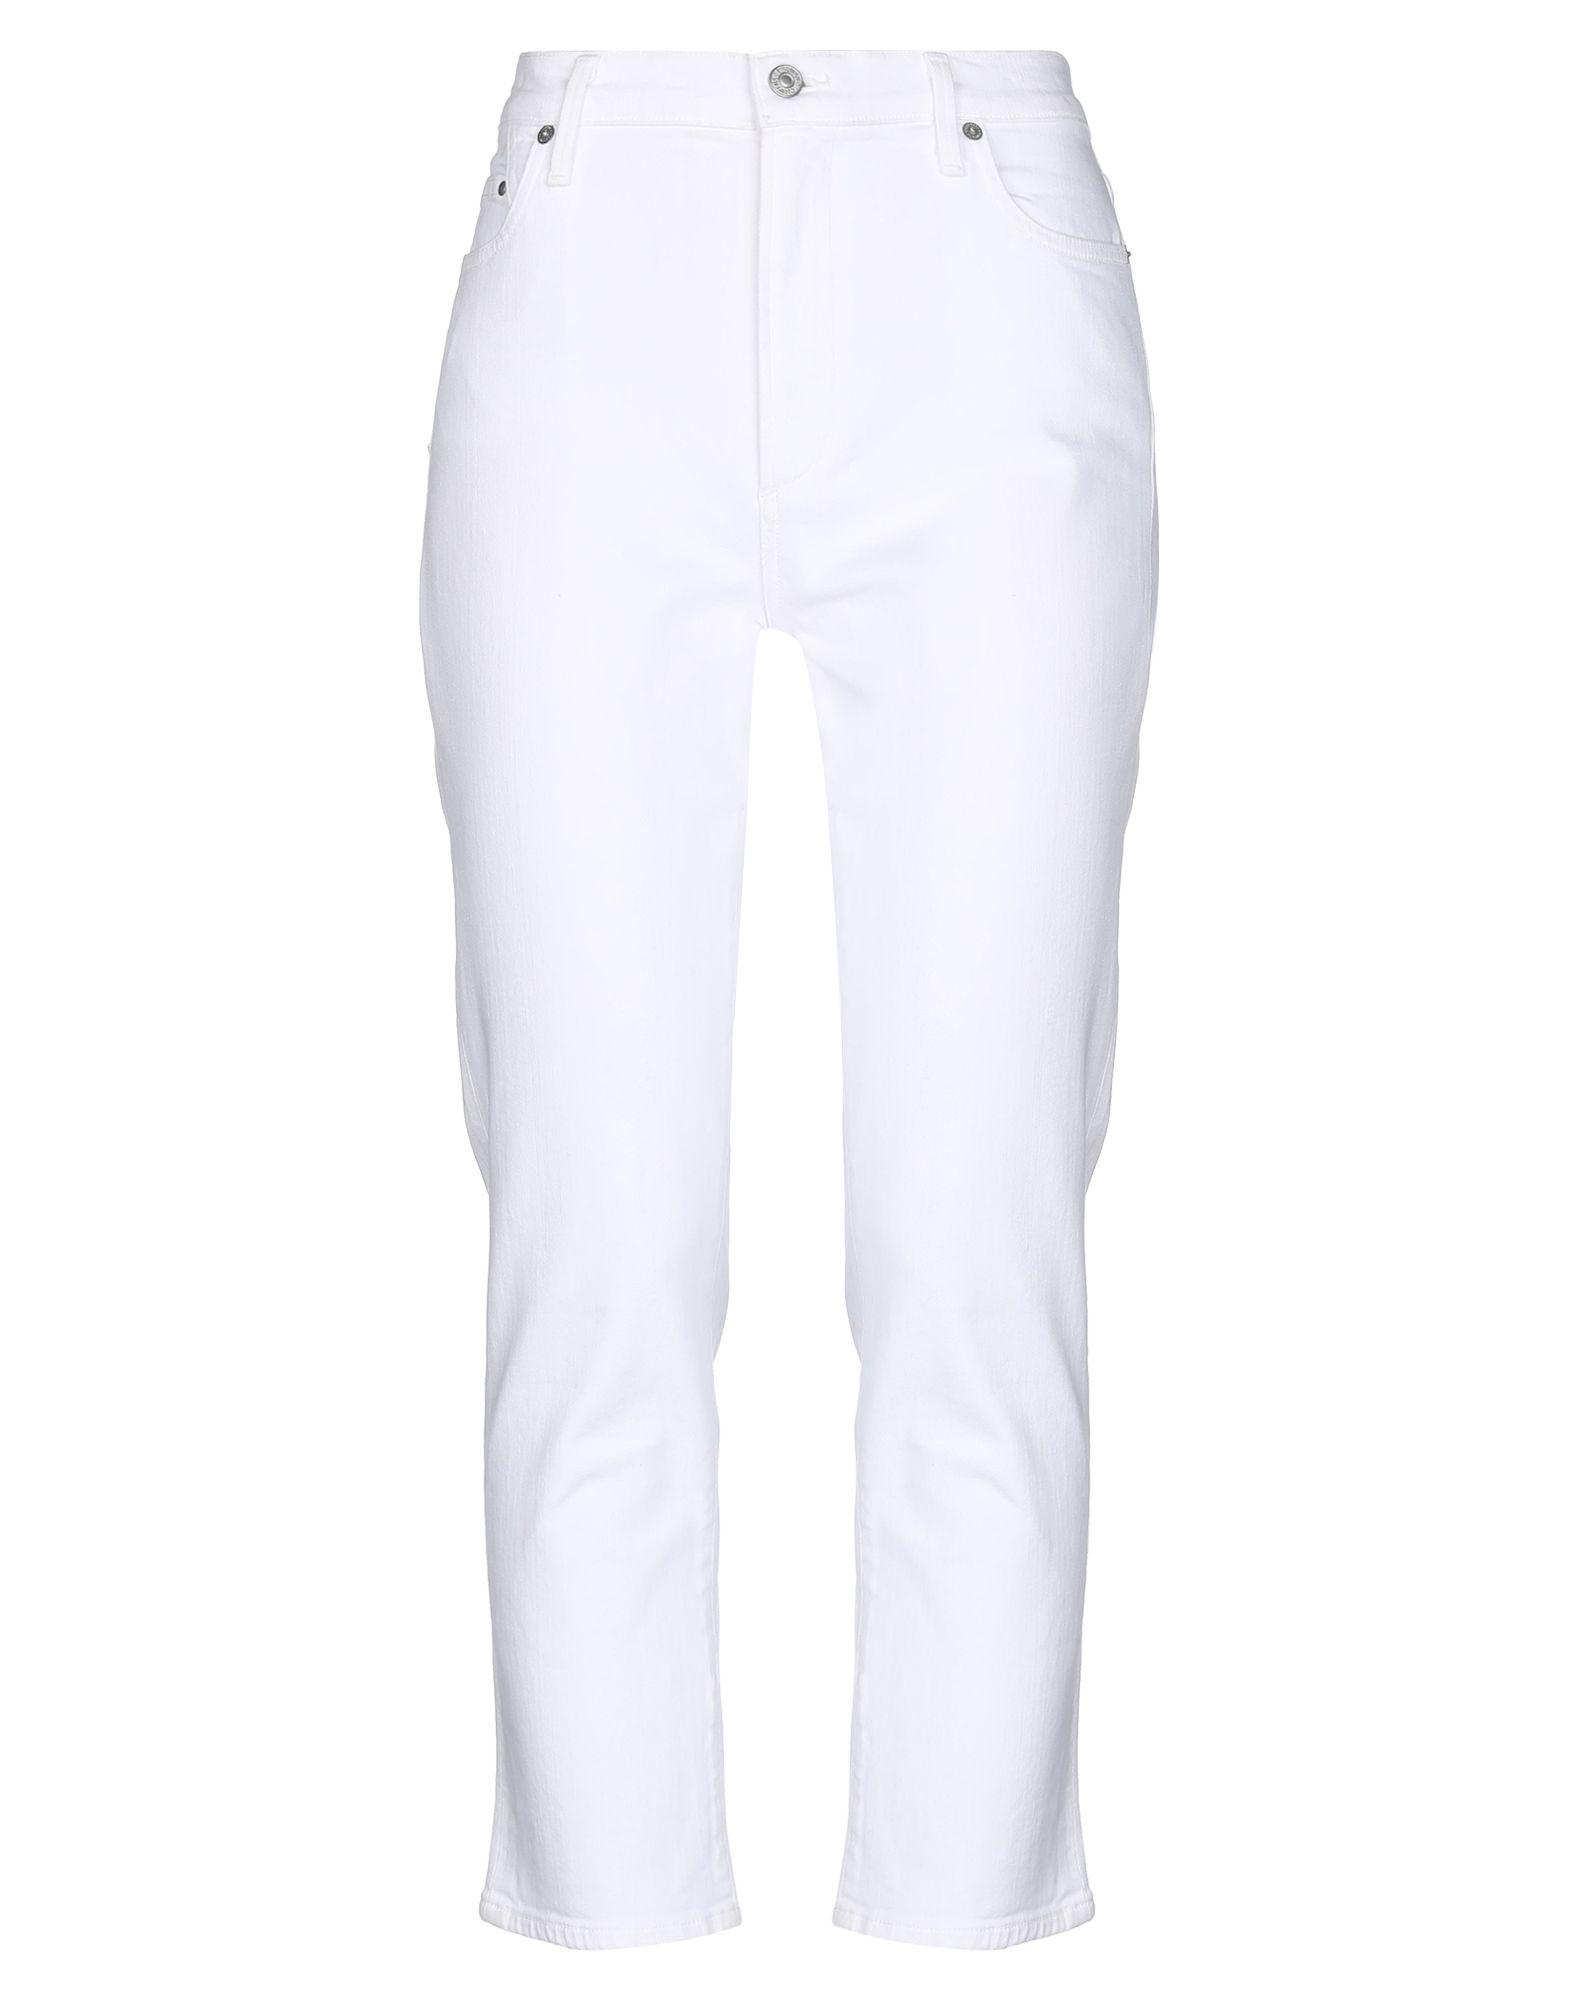 Citizens of Humanity Denim Pants in White - Lyst